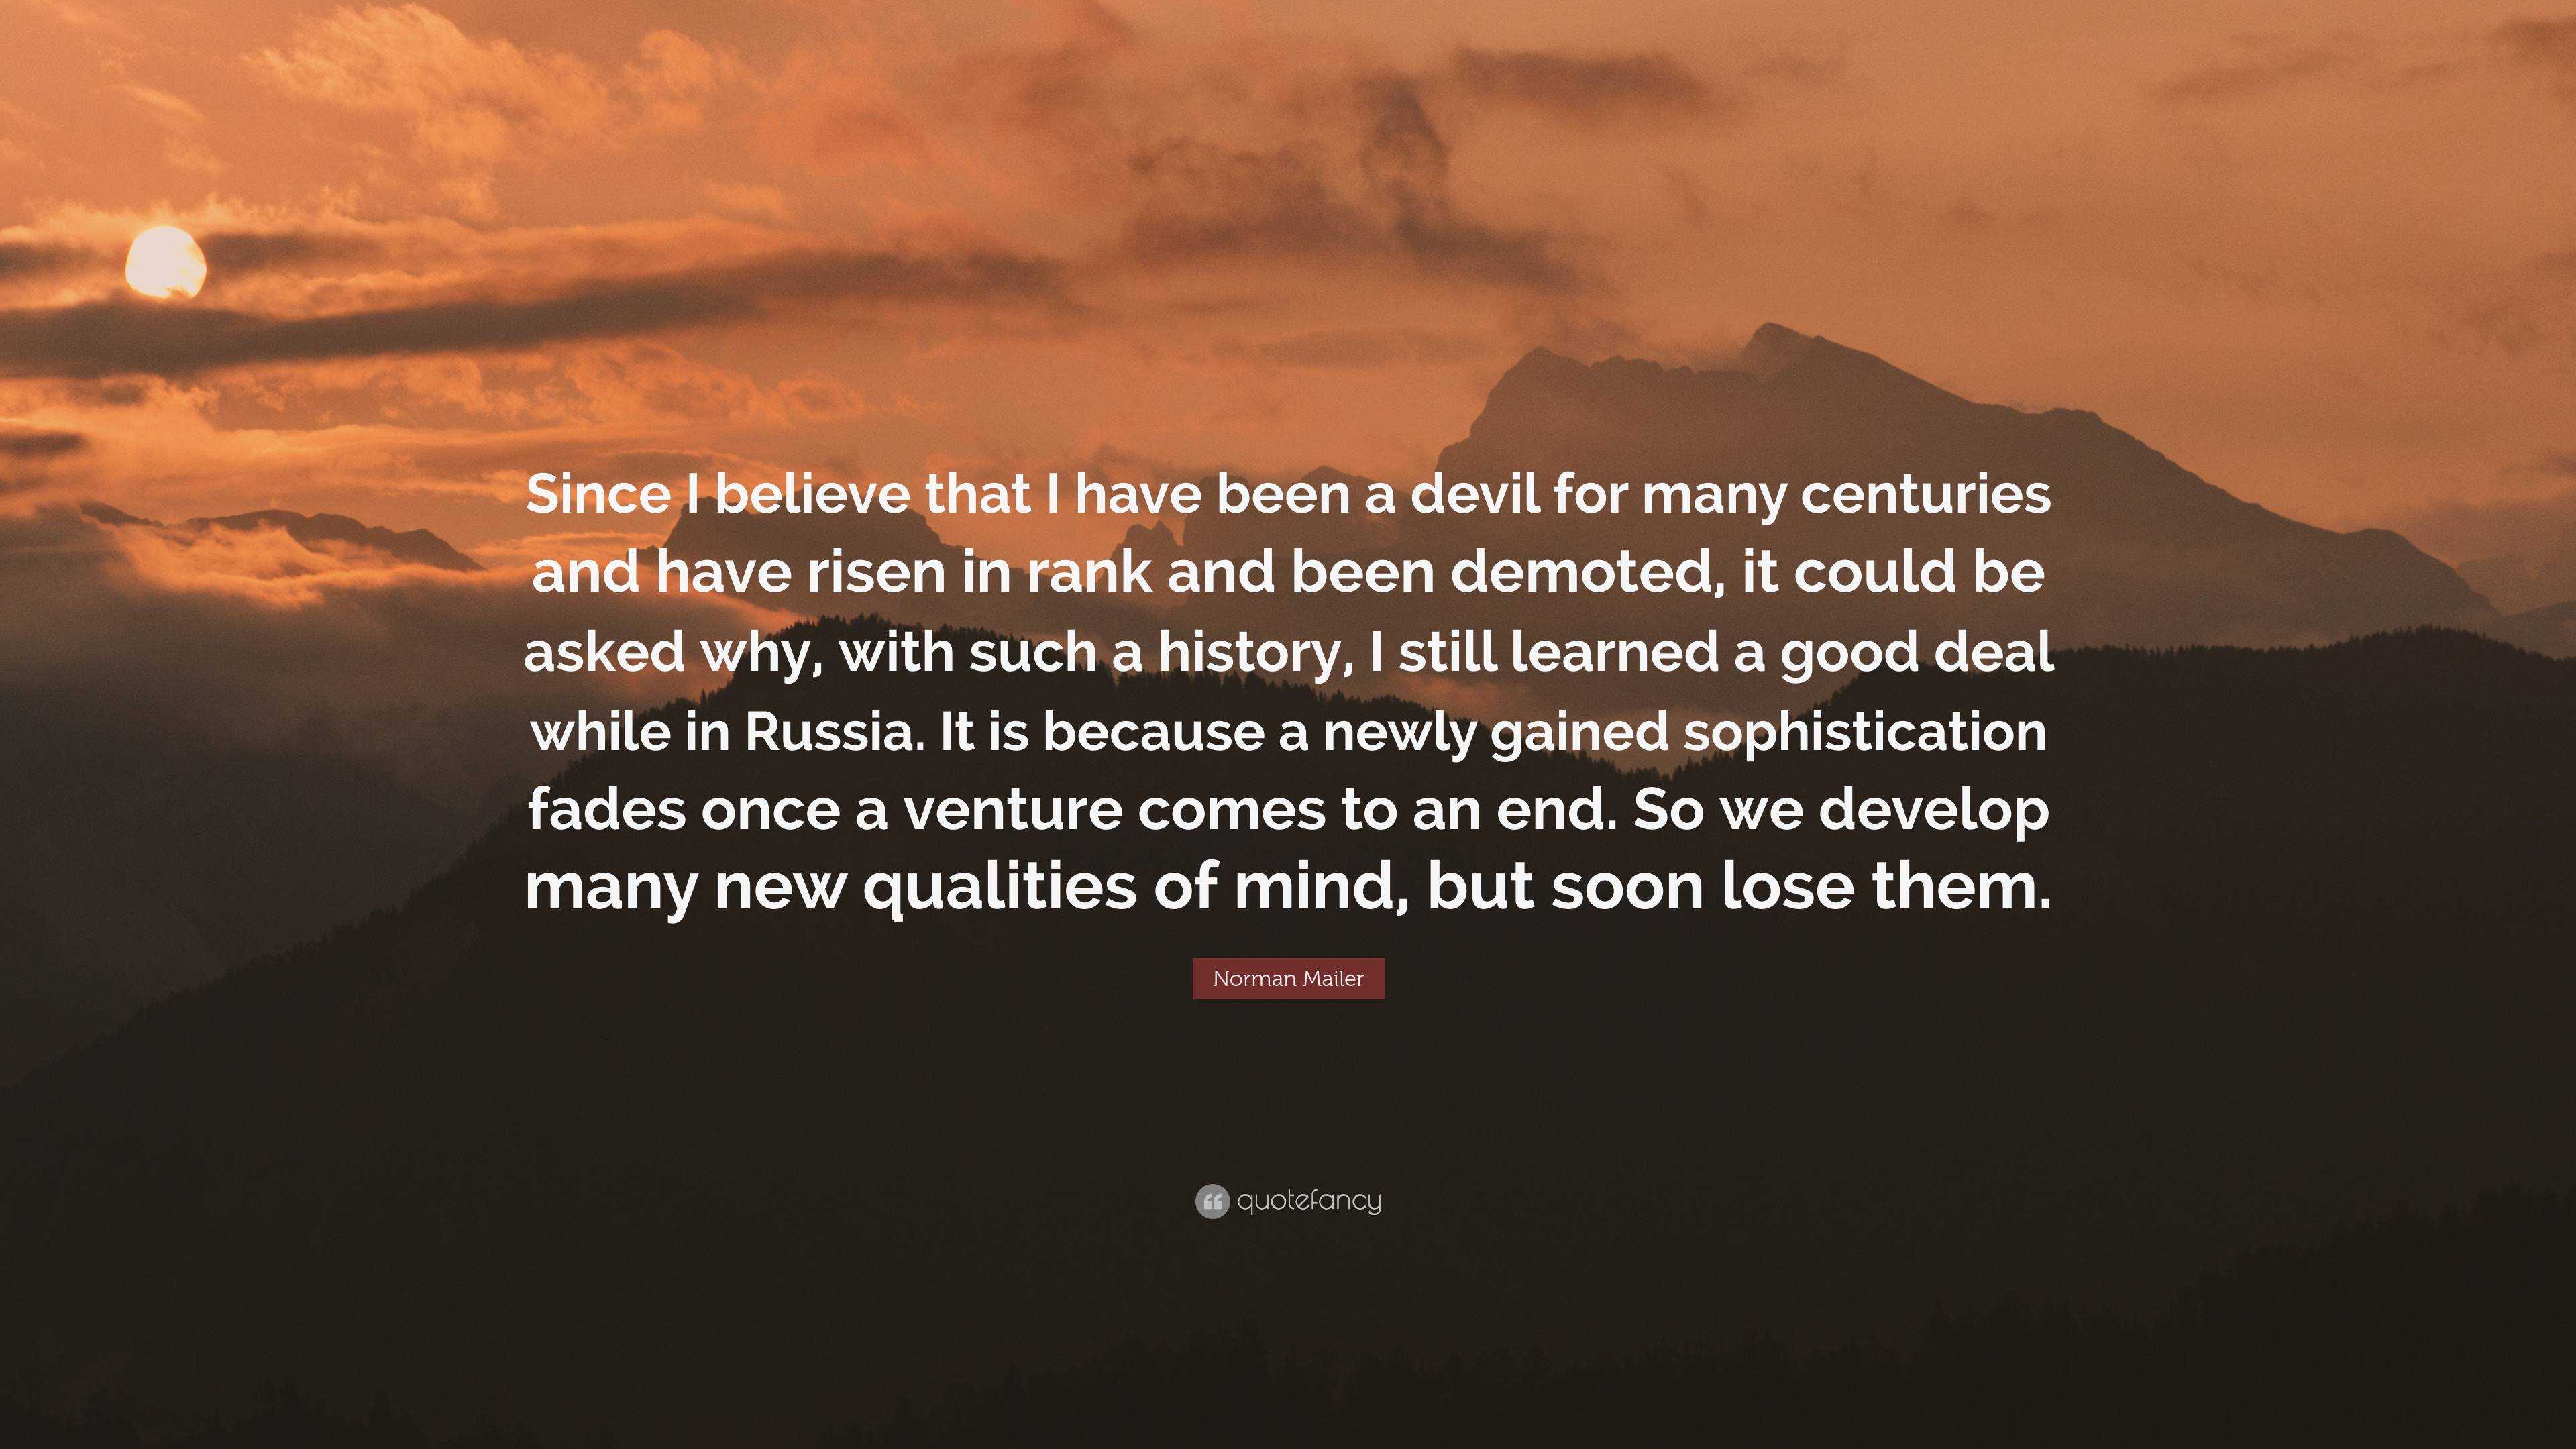 Norman Mailer Quote: “Since I believe that I have been a devil for many ...